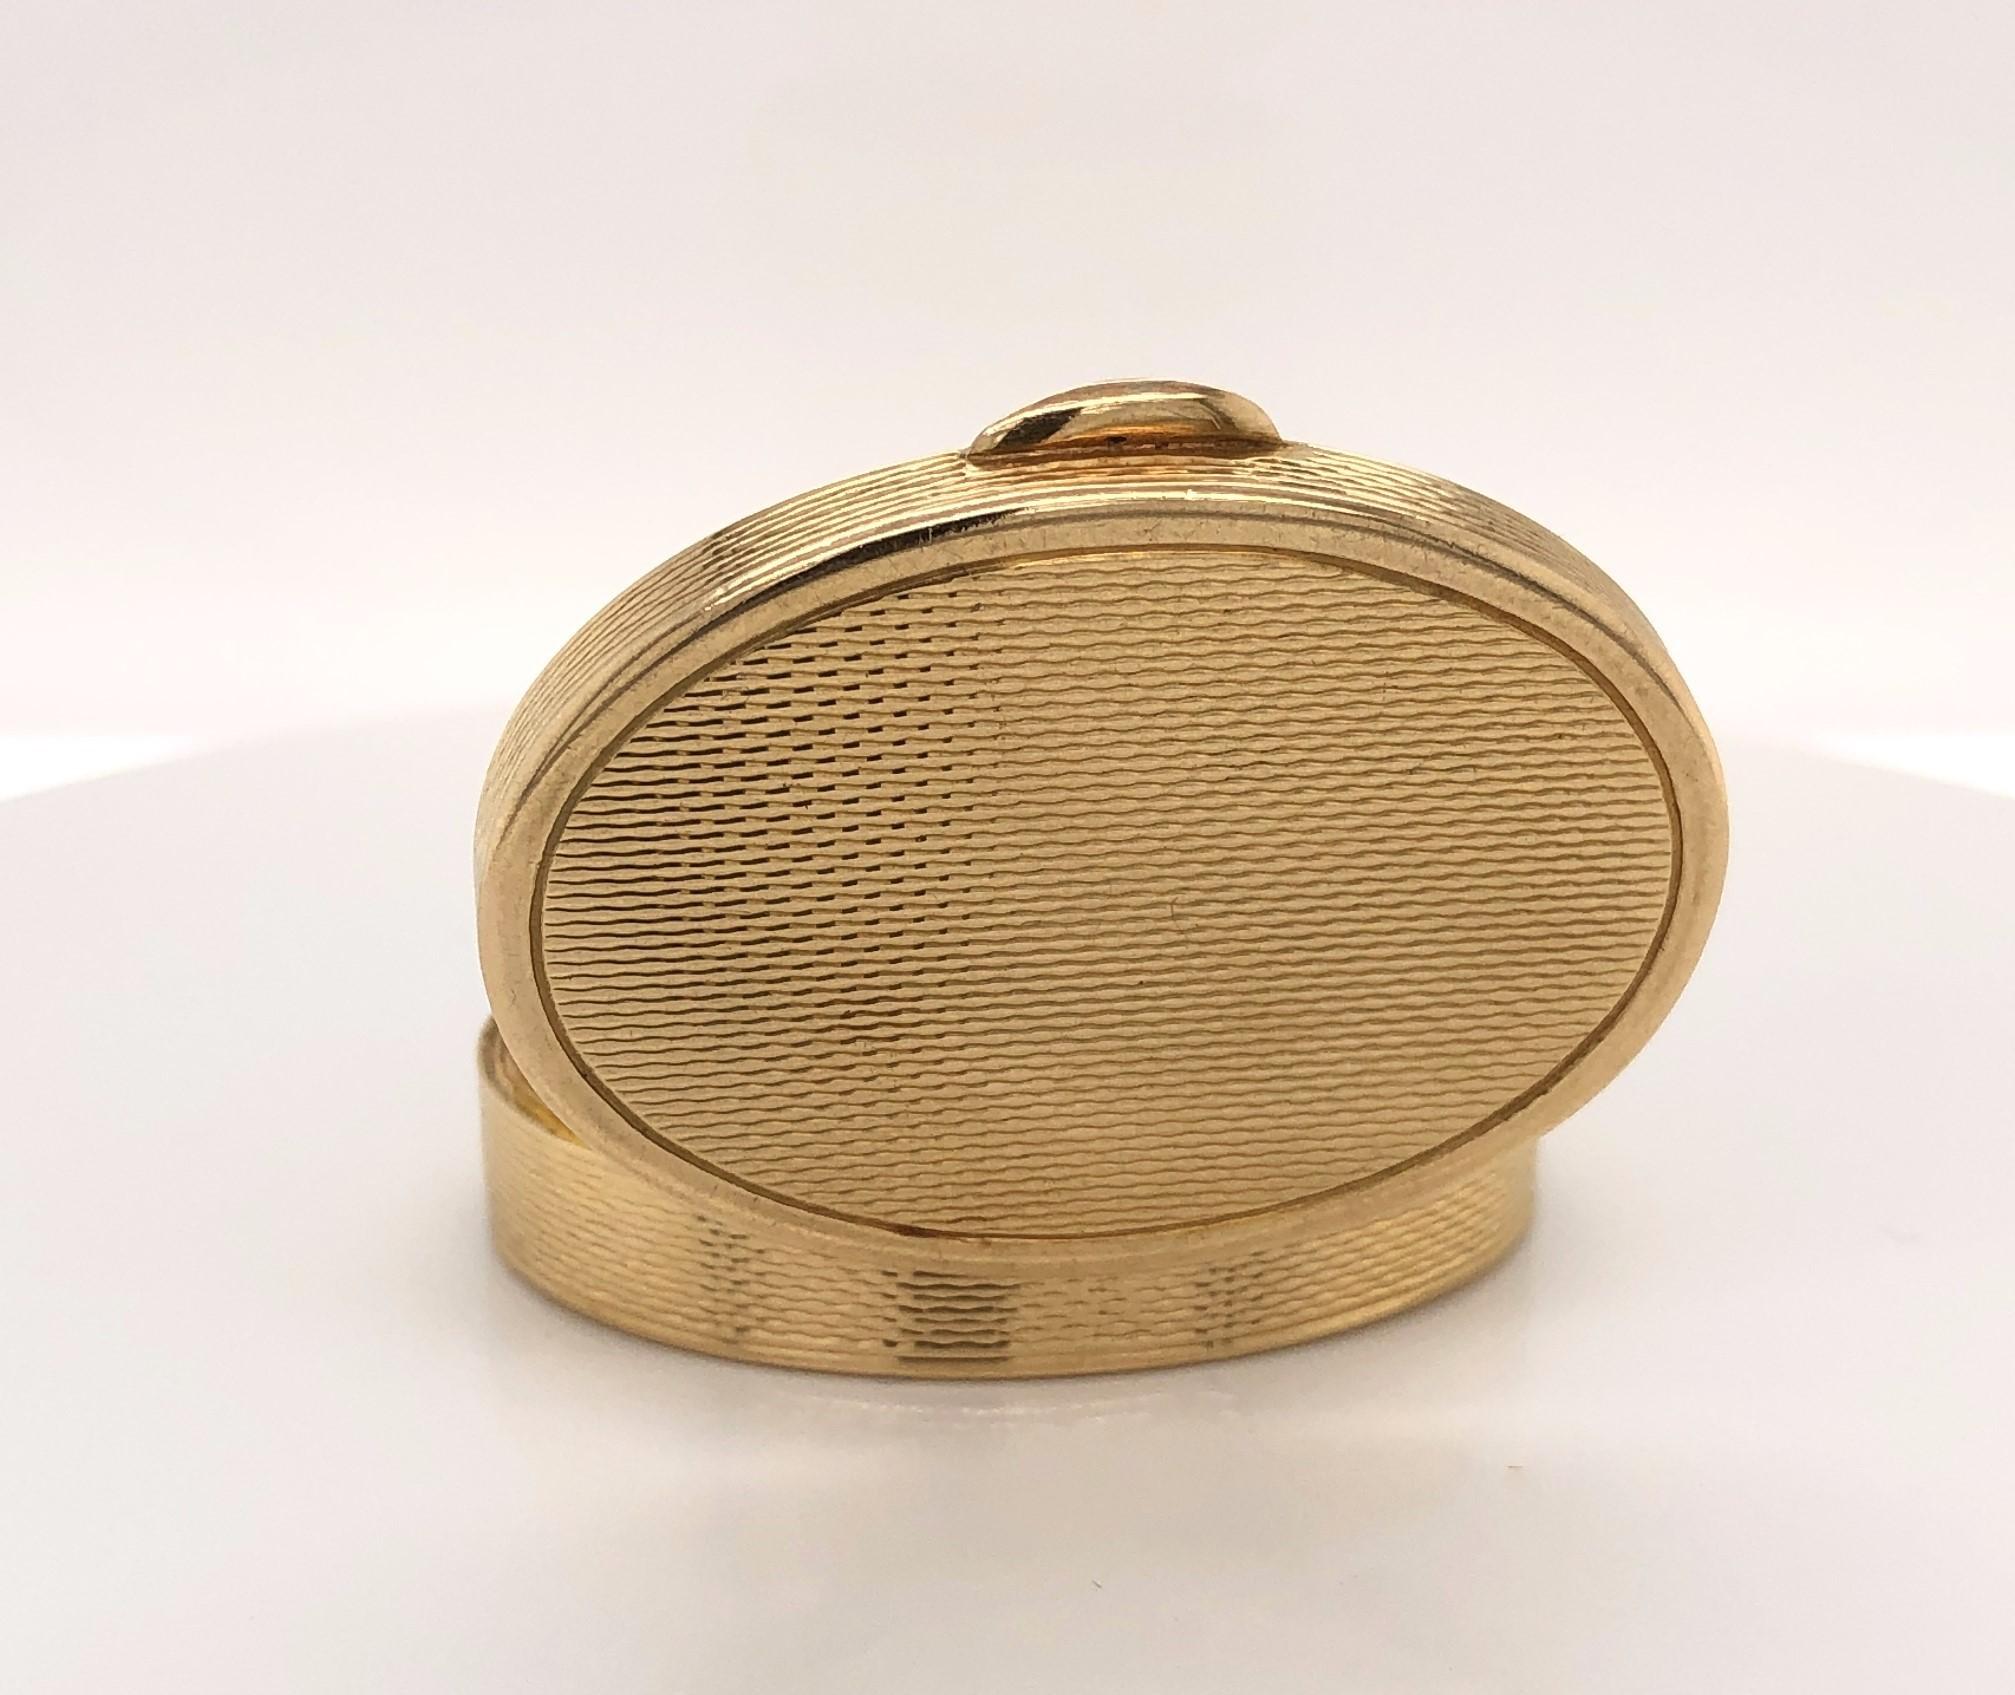 18 Karat Yellow Gold Oval Pill Box In Excellent Condition For Sale In Mount Kisco, NY